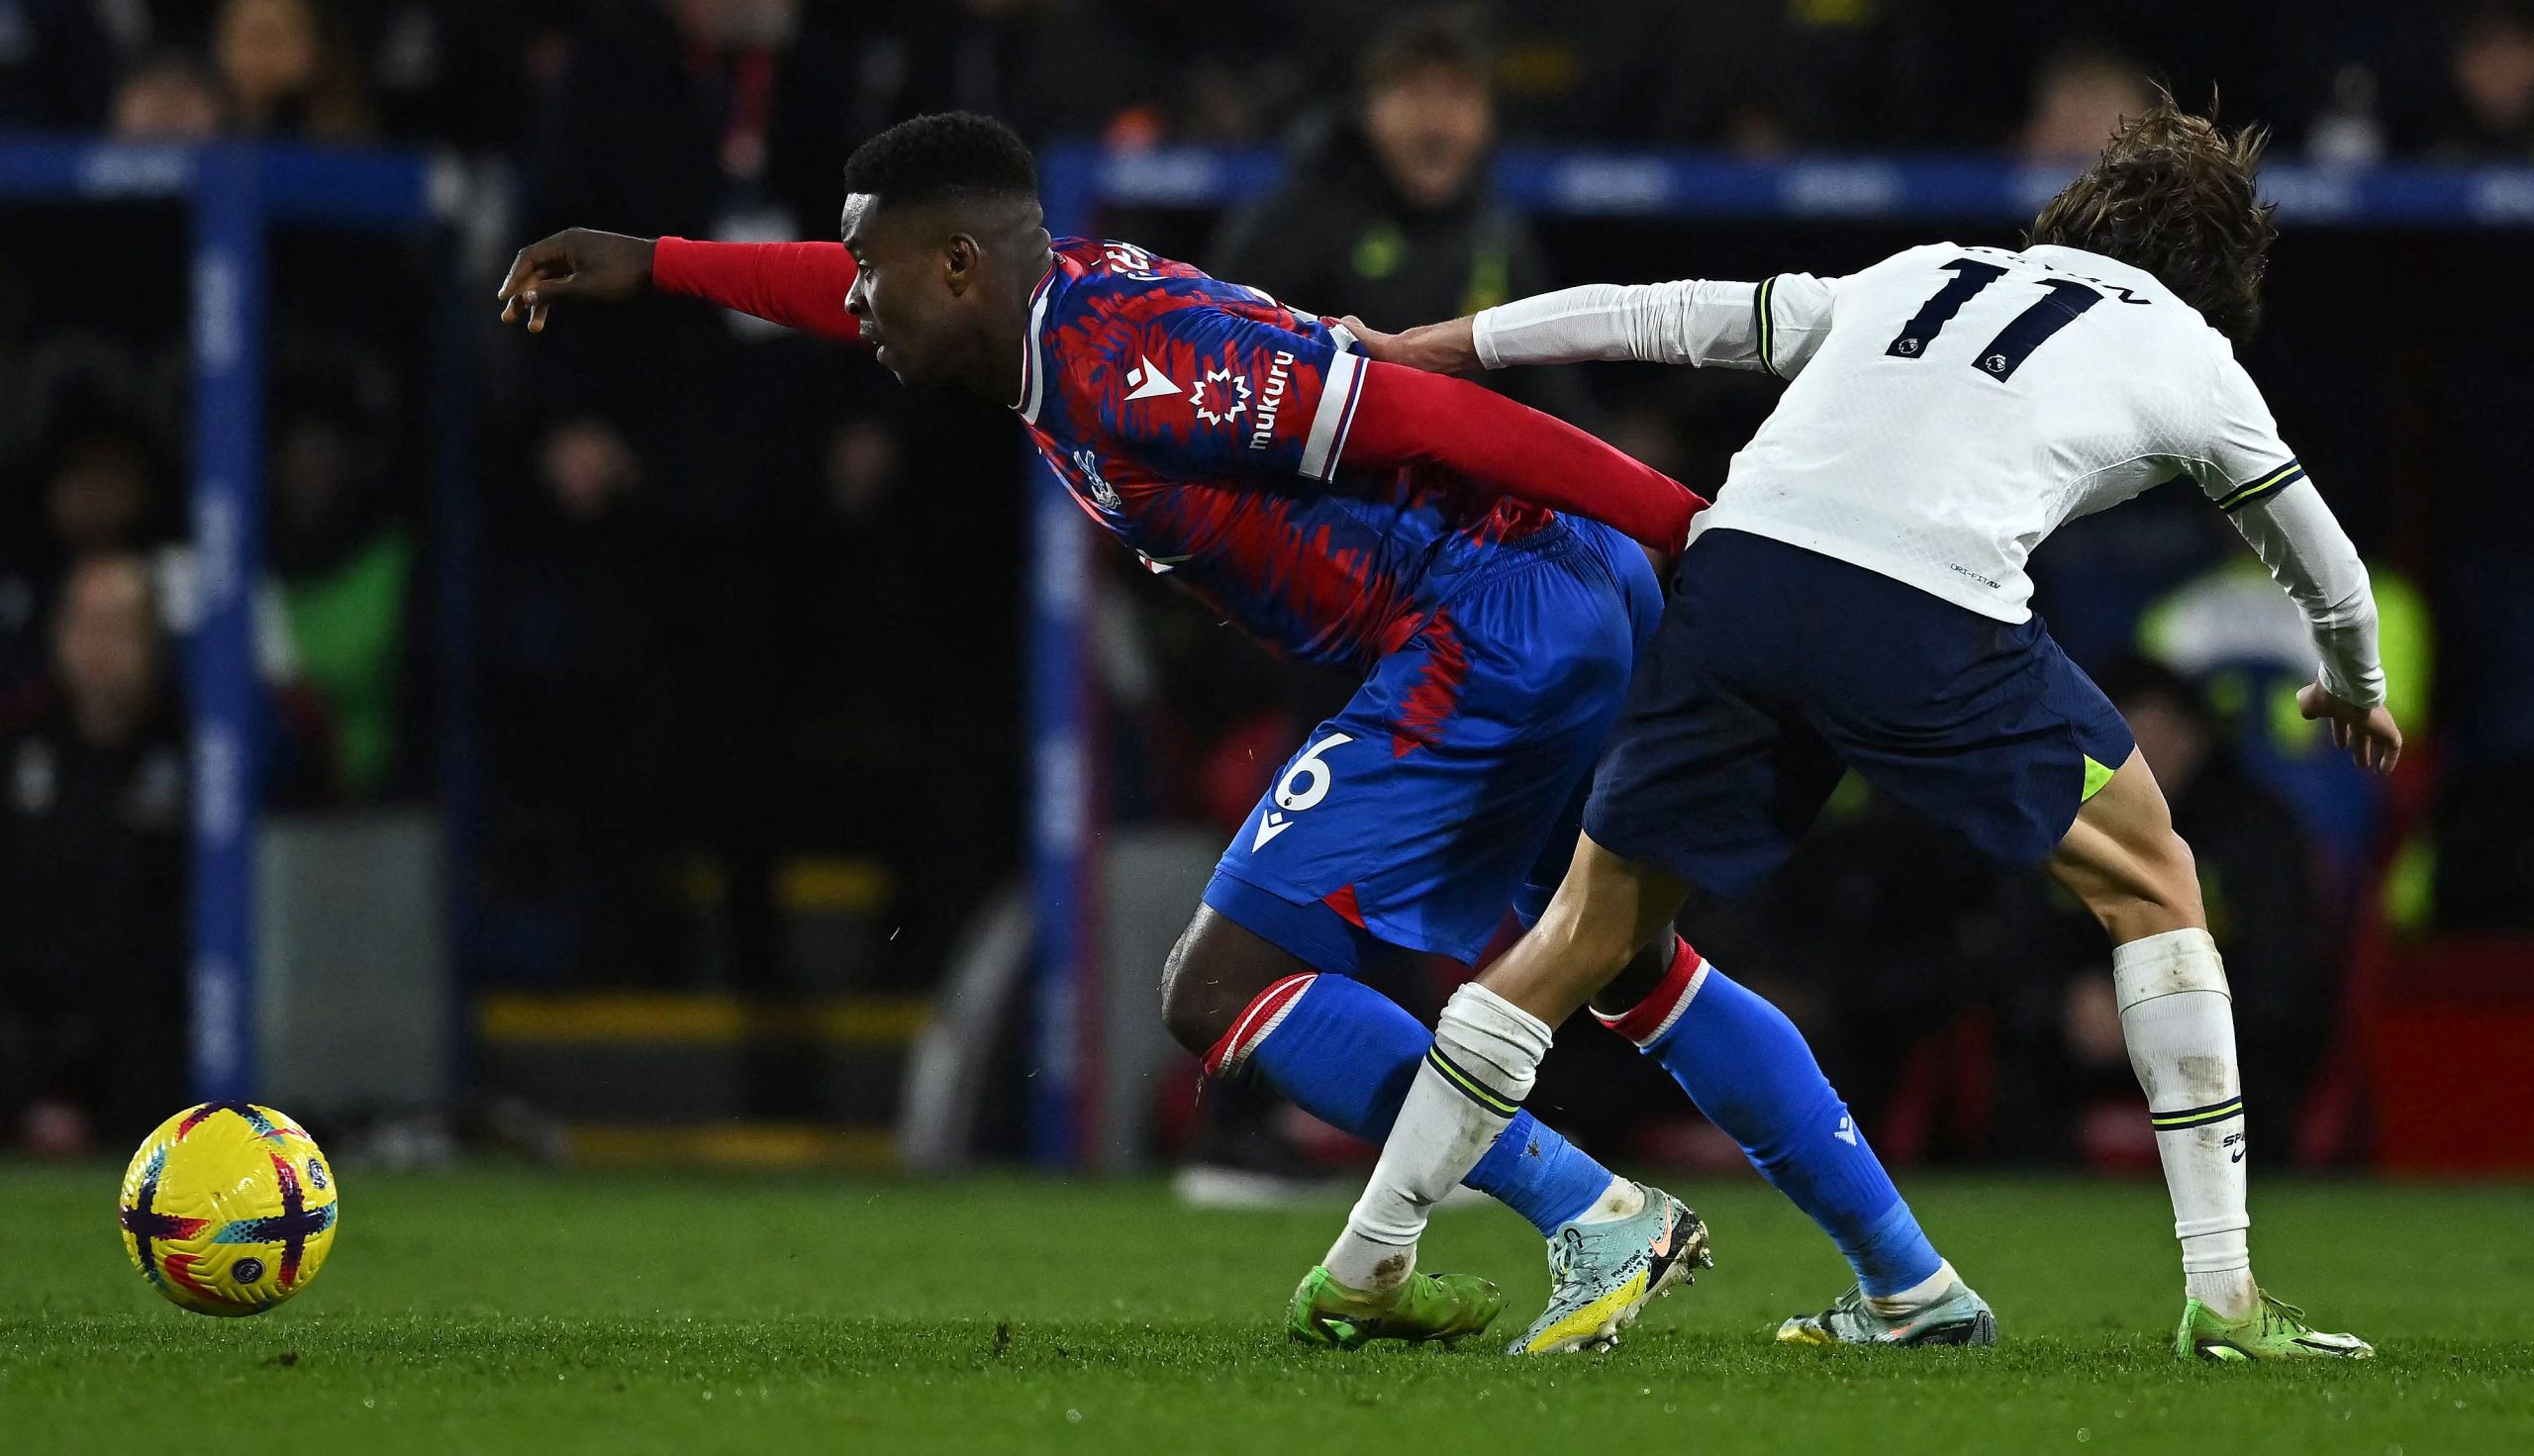 Crystal Palace's English defender Marc Guehi and Tottenham Hotspur's Bryan Gil compete for the ball.